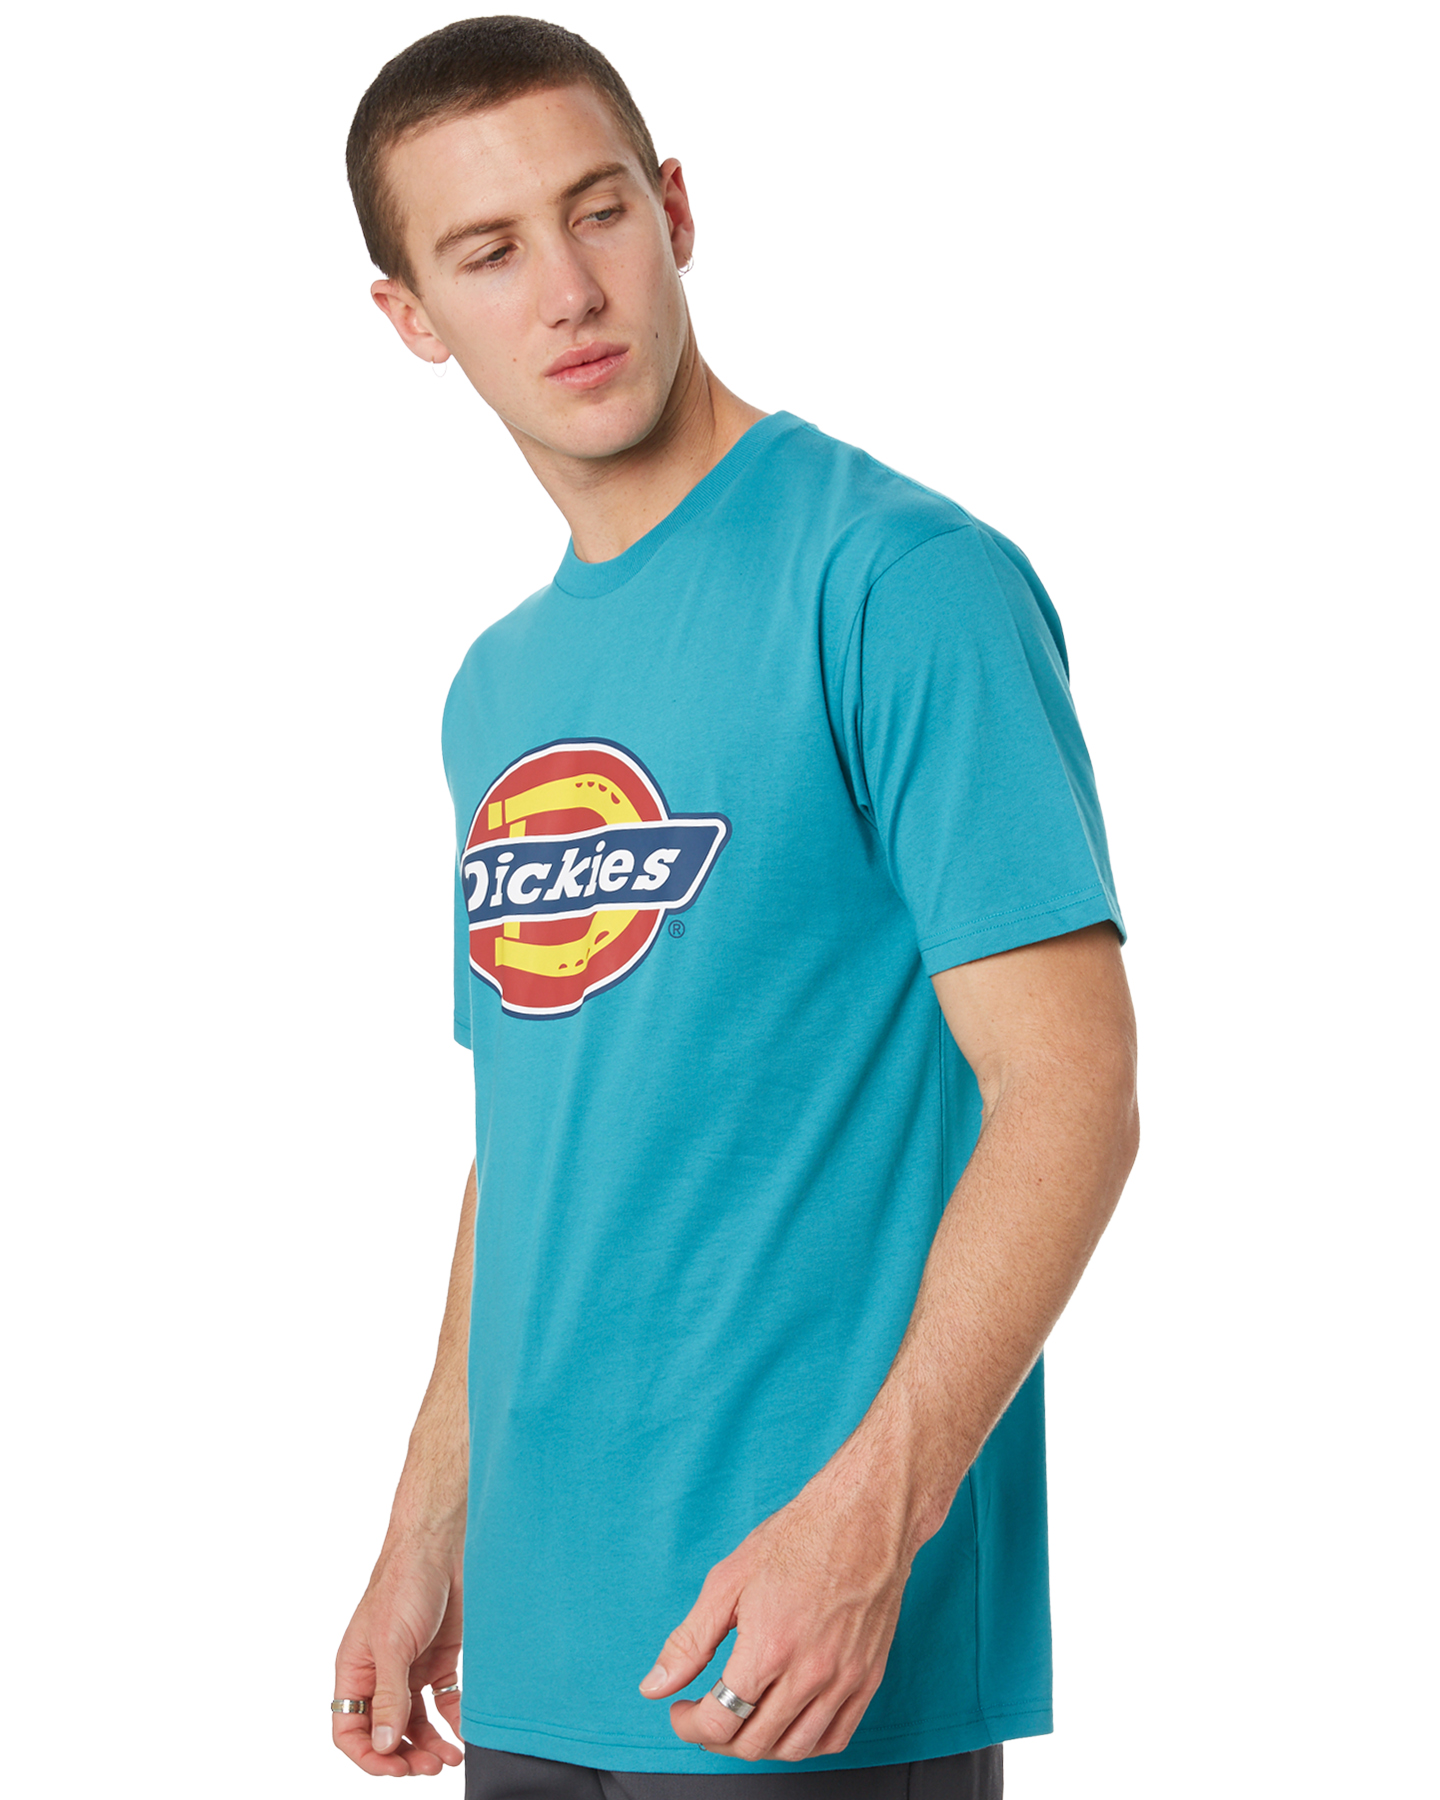 Dickies Hs Classic Fit Mens Tee - Teal | SurfStitch